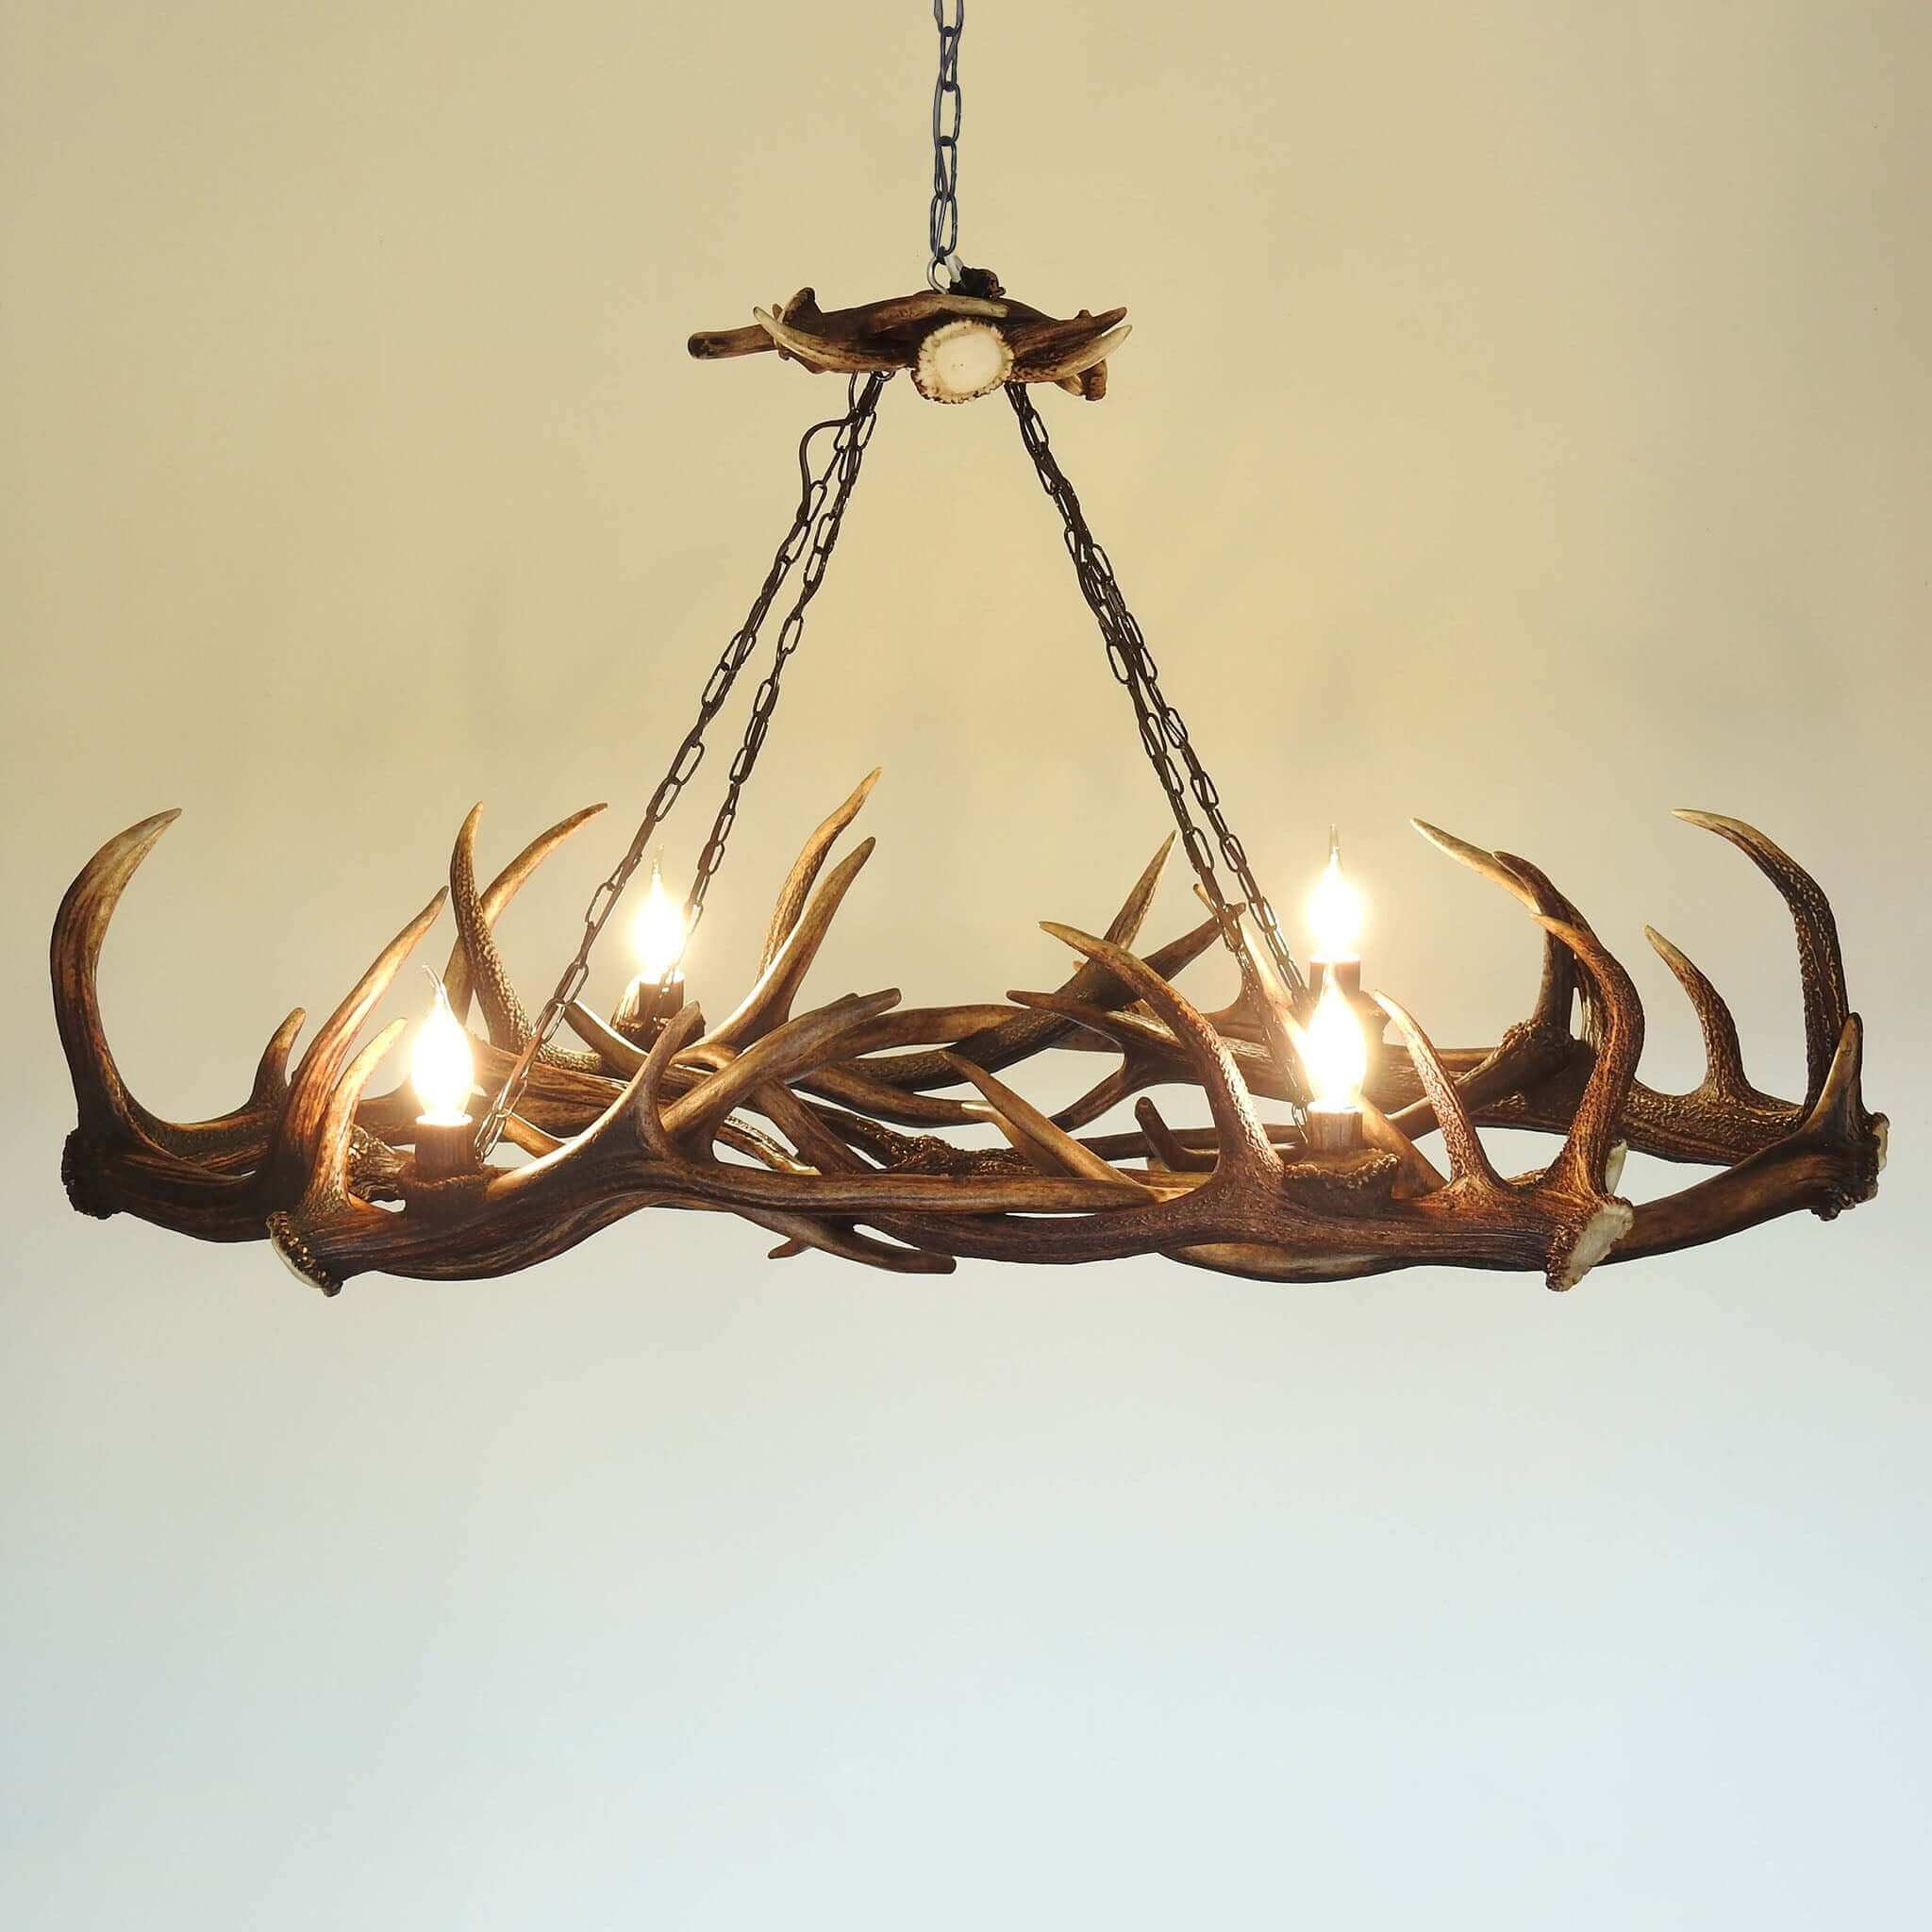 Real antler chandelier for table.